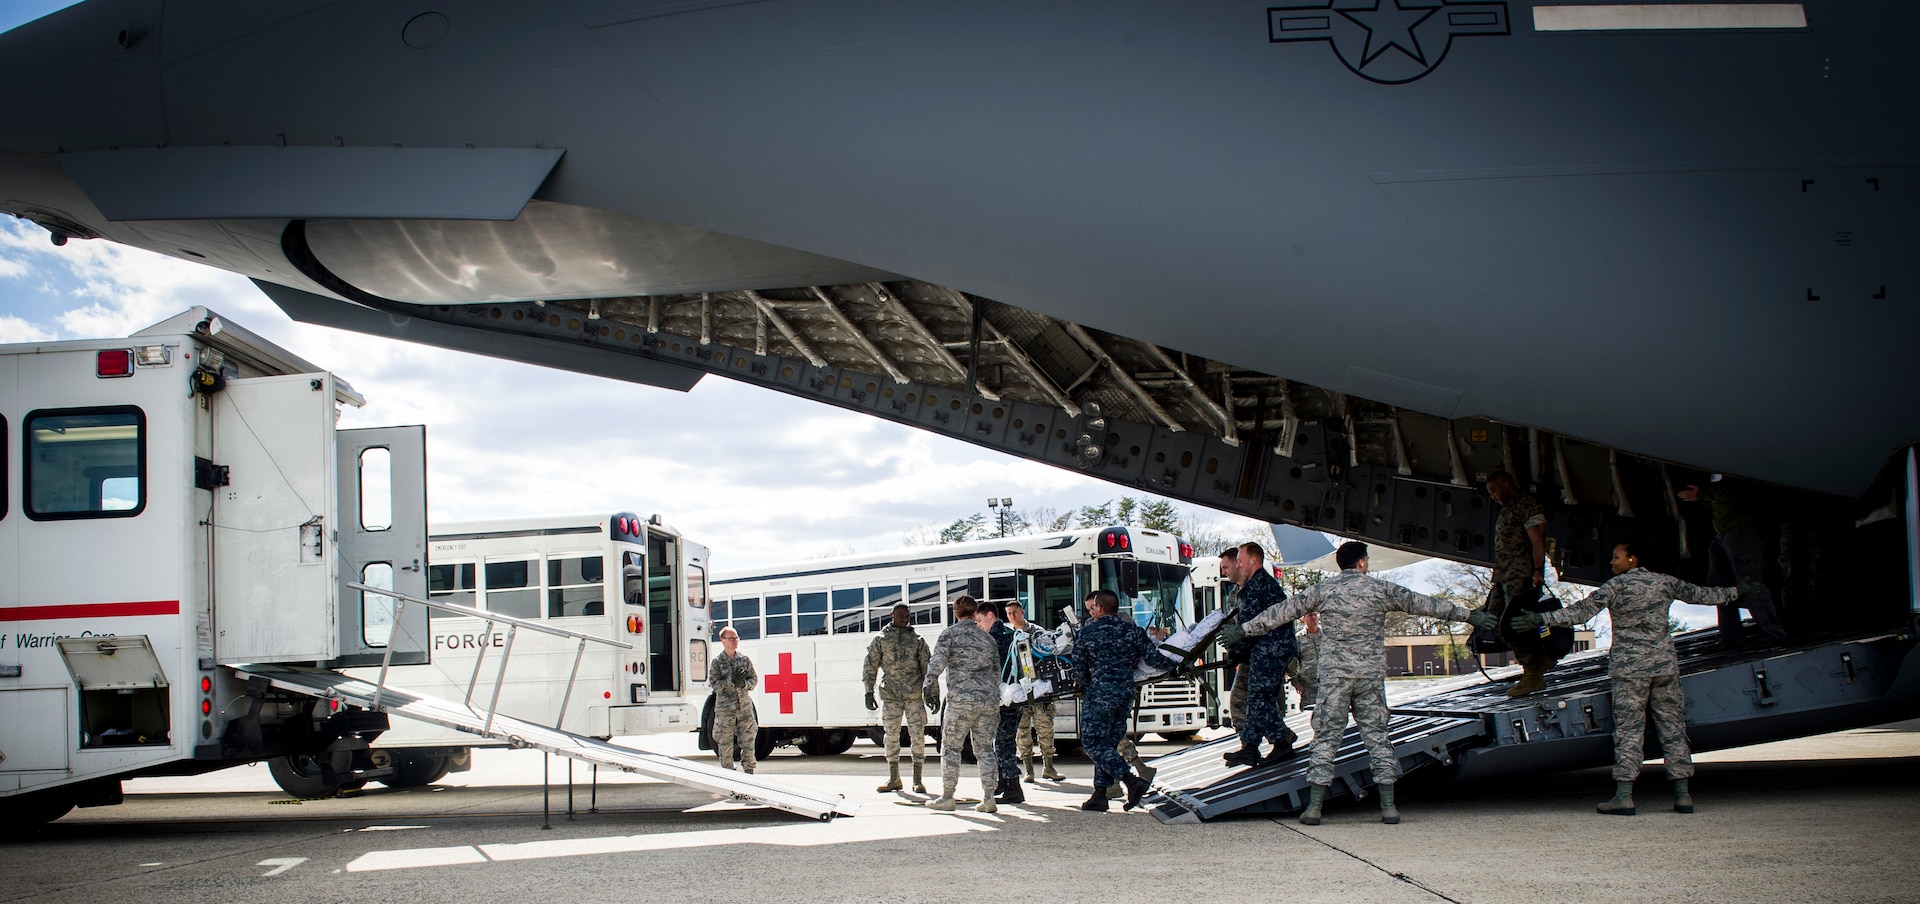 59th Medical Wing CCATT team members, in conjunction with mission partners, transition from their aircraft to an ambulance during an infant patient transport mission from Germany to Walter Reed National Medical Center, Bethesda, Md., April 19th, 2018. Examples of conditions requiring CCATT support include supportive or resuscitate care of shock/hemorrhage, respiratory failure, and multi-system trauma.